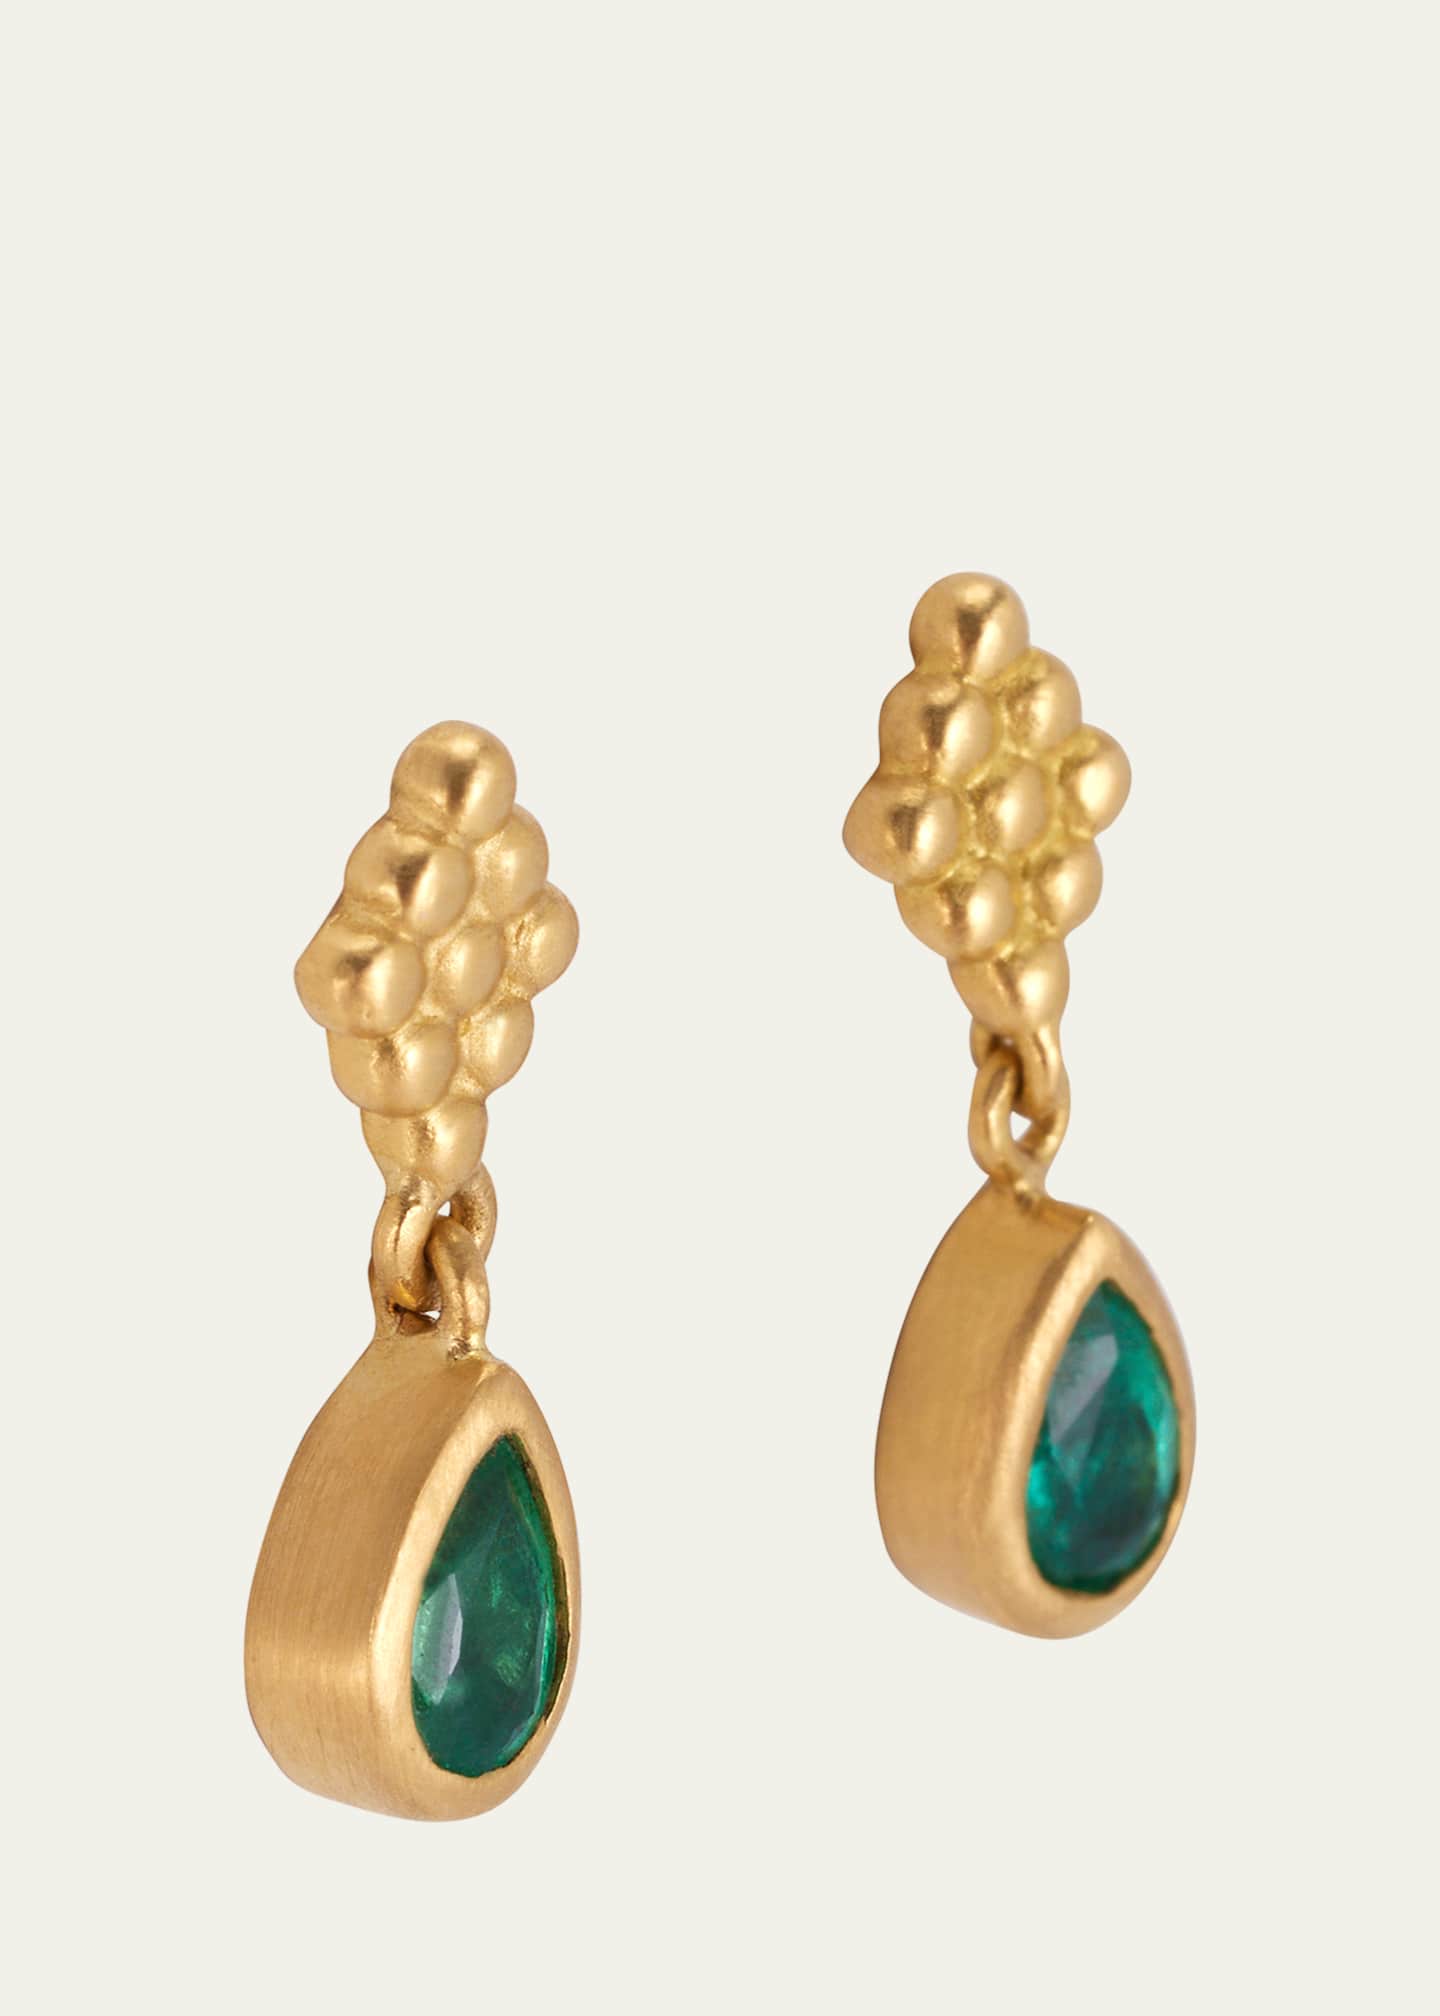 Prounis Jewelry Small Emerald Nona Earrings Image 3 of 4